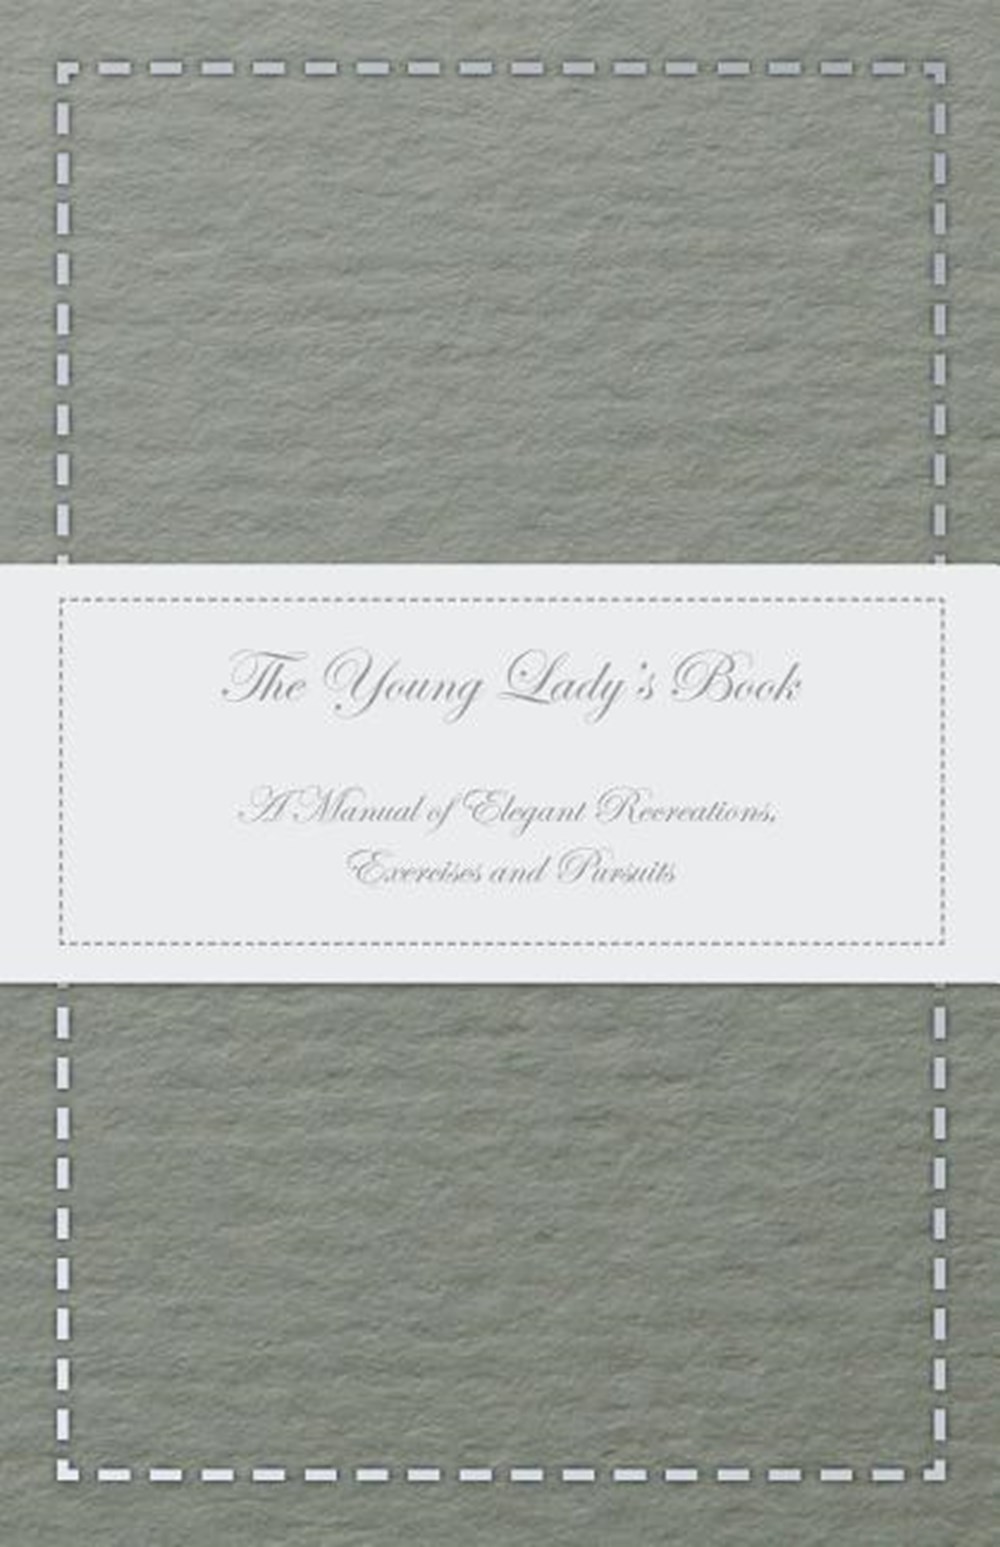 Young Lady's Book - A Manual of Elegant Recreations, Exercises and Pursuits